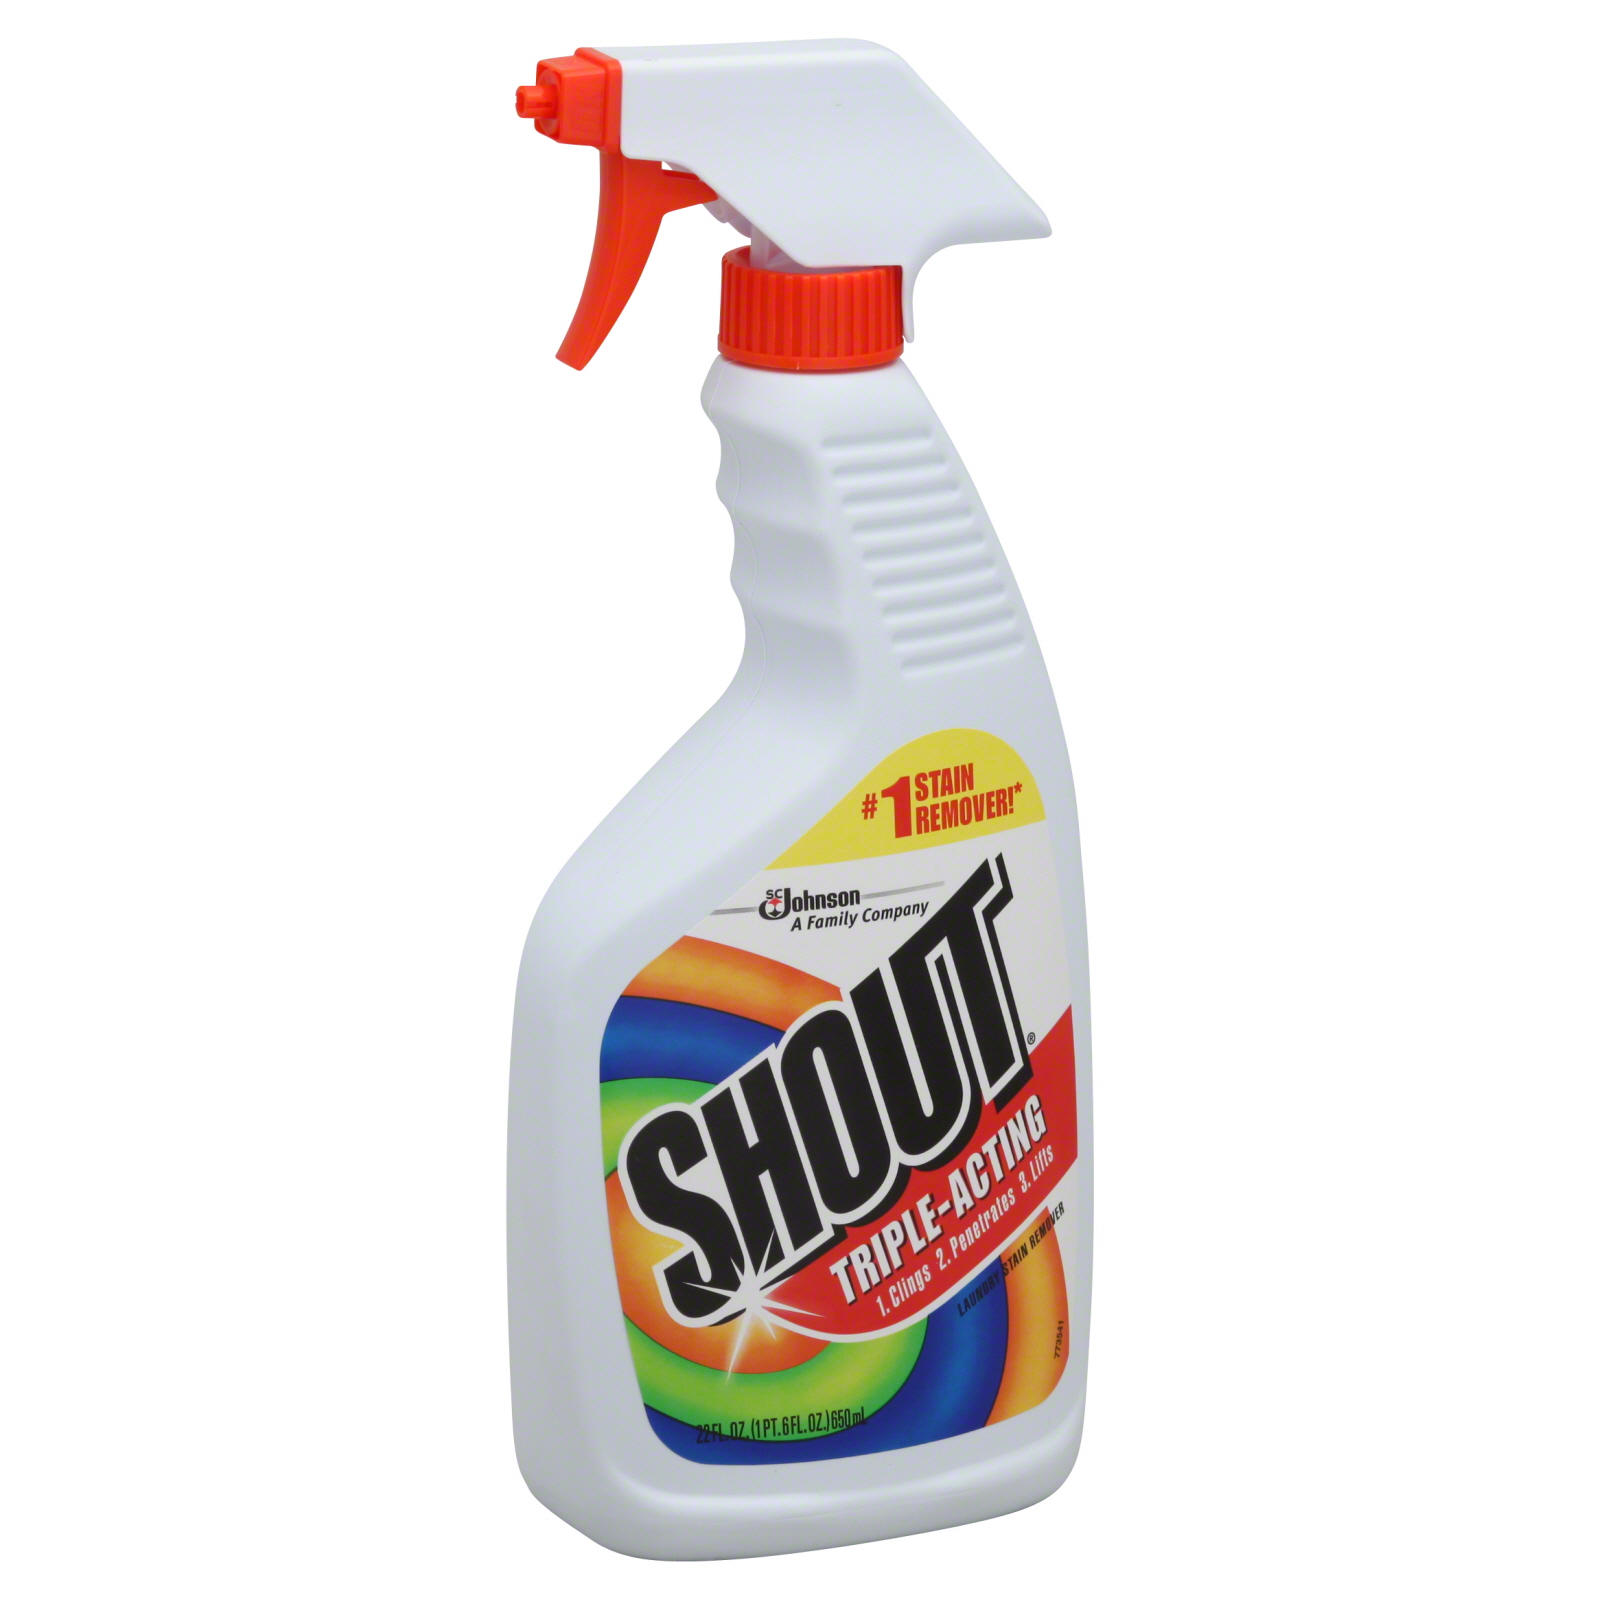 SHOUT Multi Purpose Cleaning Wipes - 30 Count